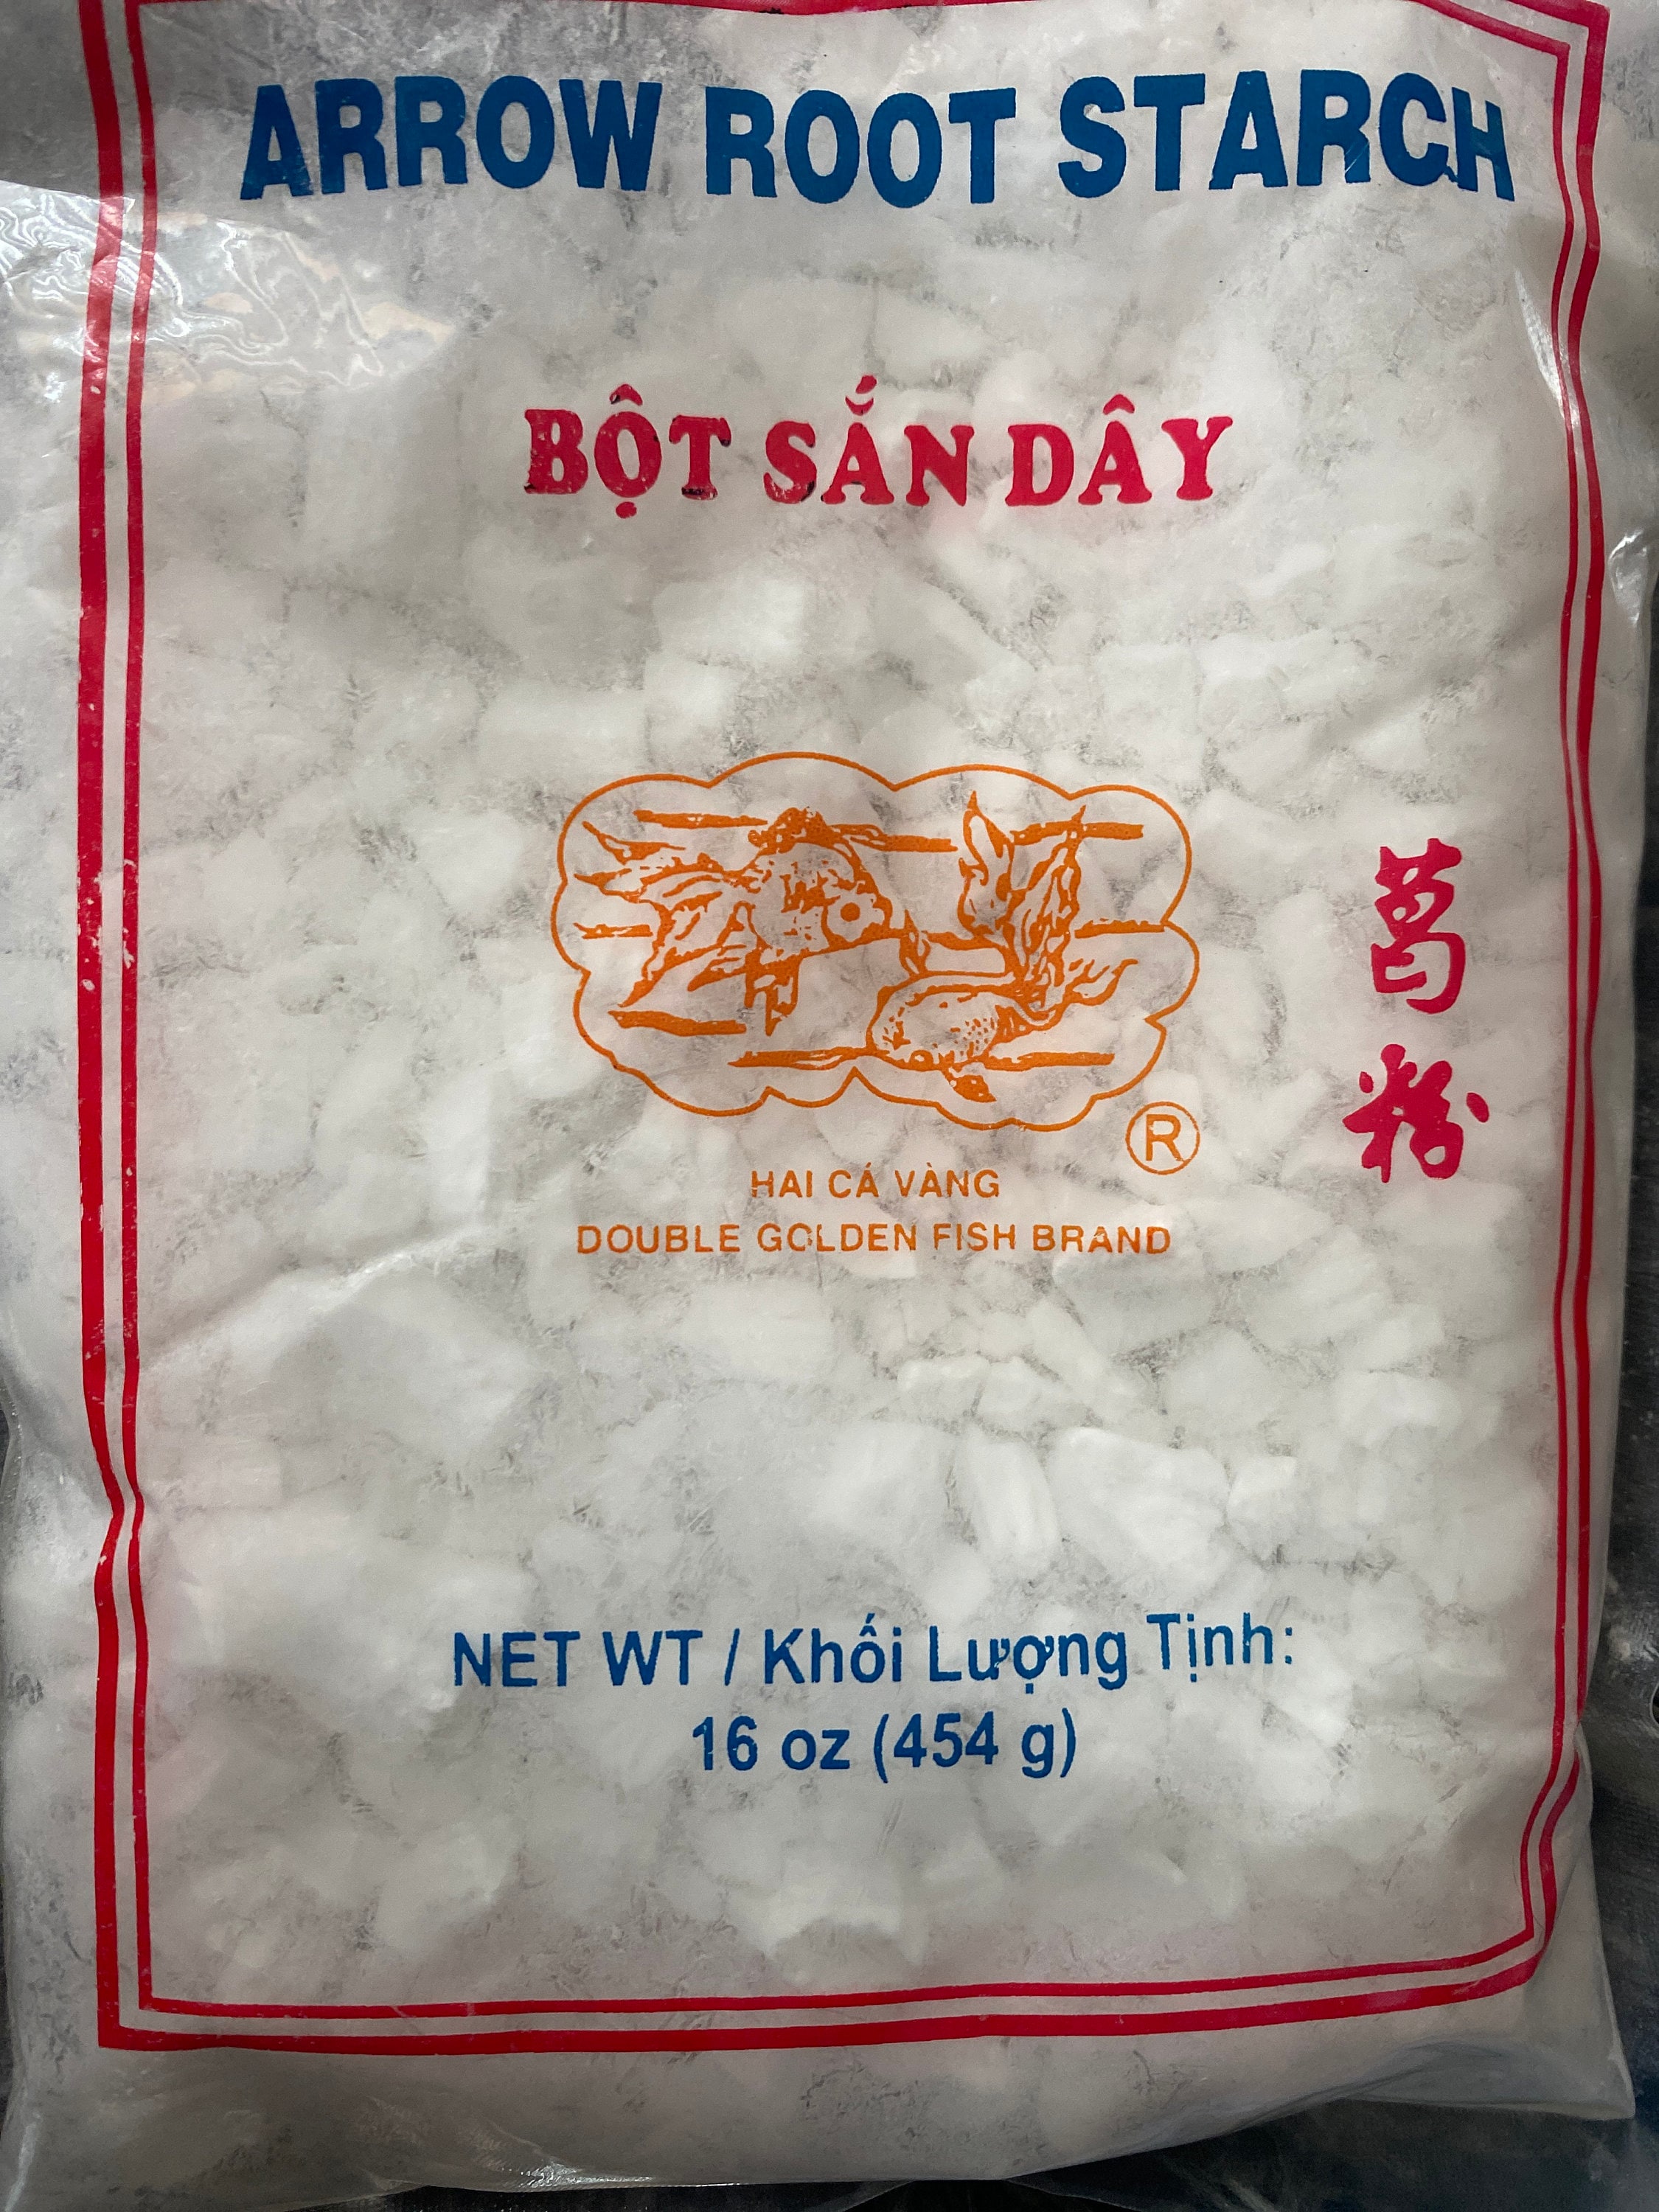 Twin Dolphin Bot San Day Arrowroot Flour Chunks, 10.5 Ounce (300g)  Reclosable Jars [Pack of 2]